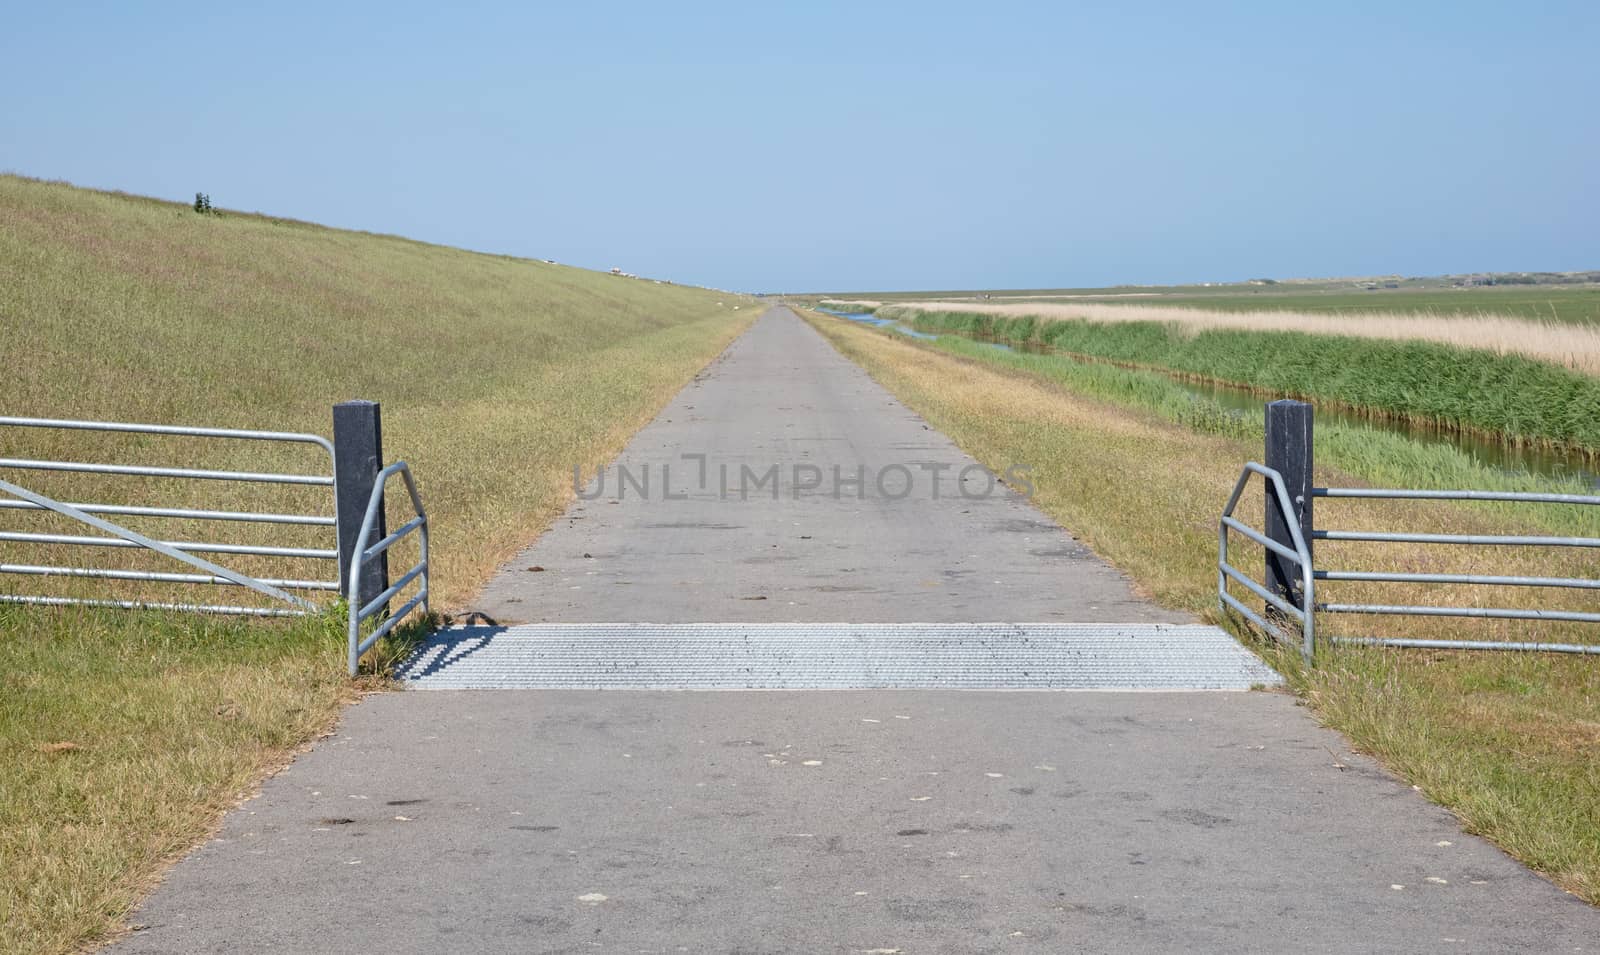 Cattle grid in ground, an obstacle used to prevent wild cattle and other wildlife from crossing